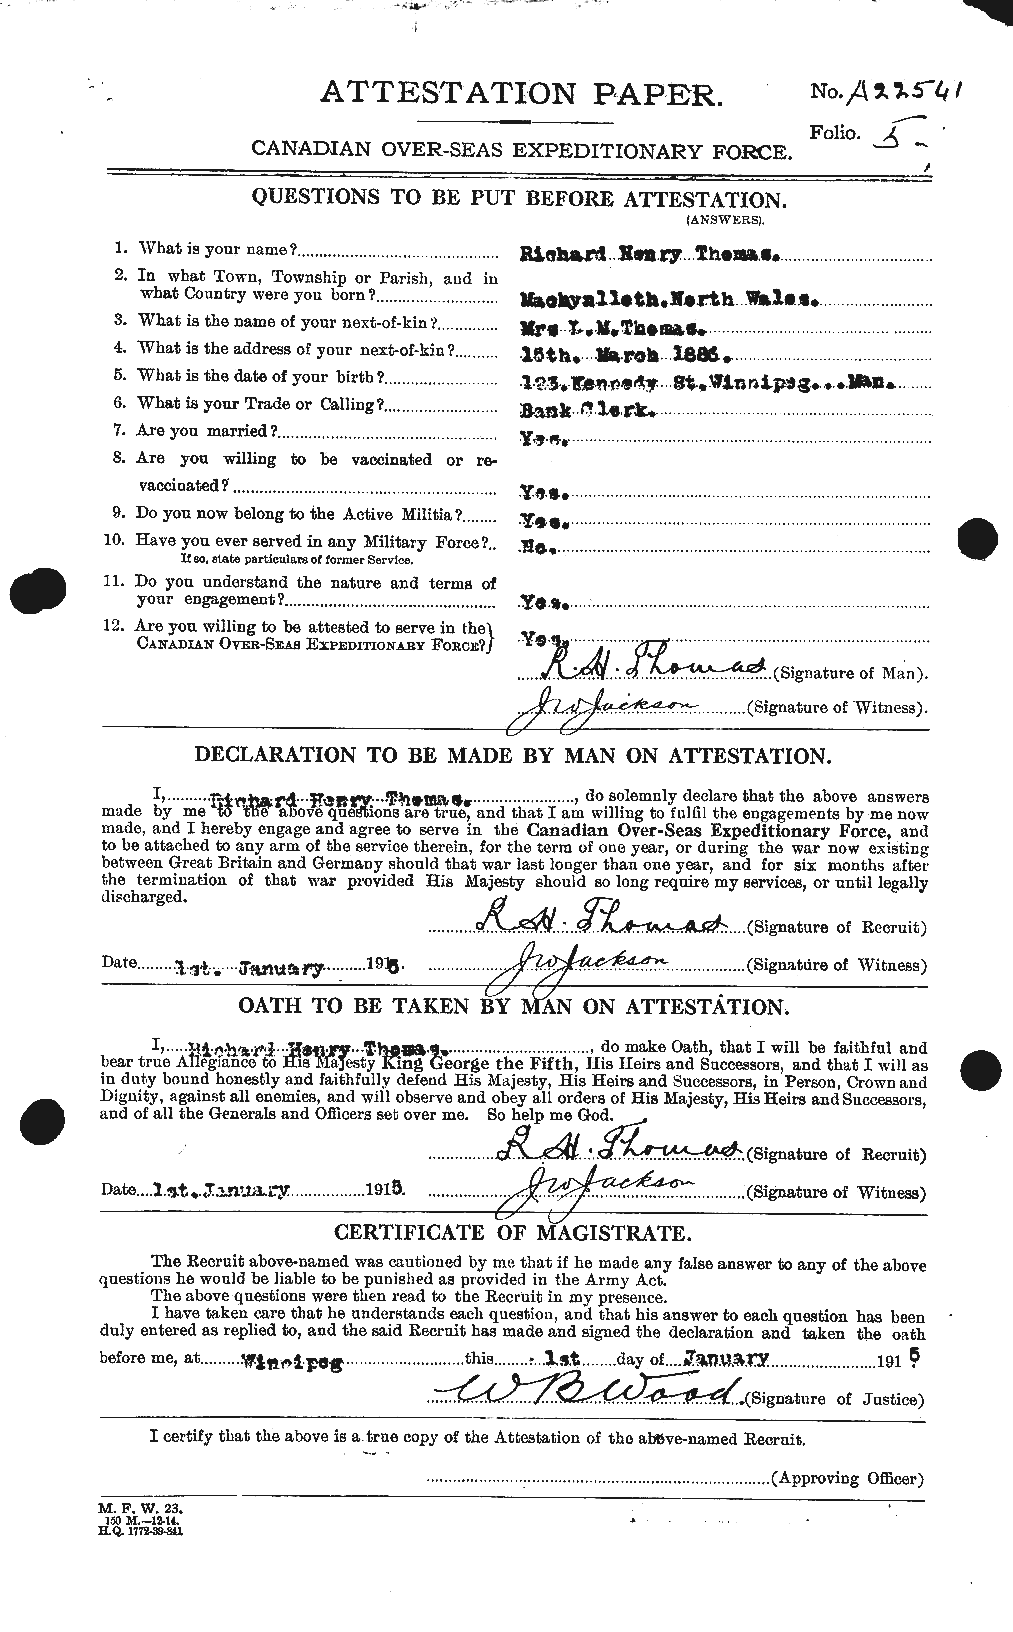 Personnel Records of the First World War - CEF 632633a